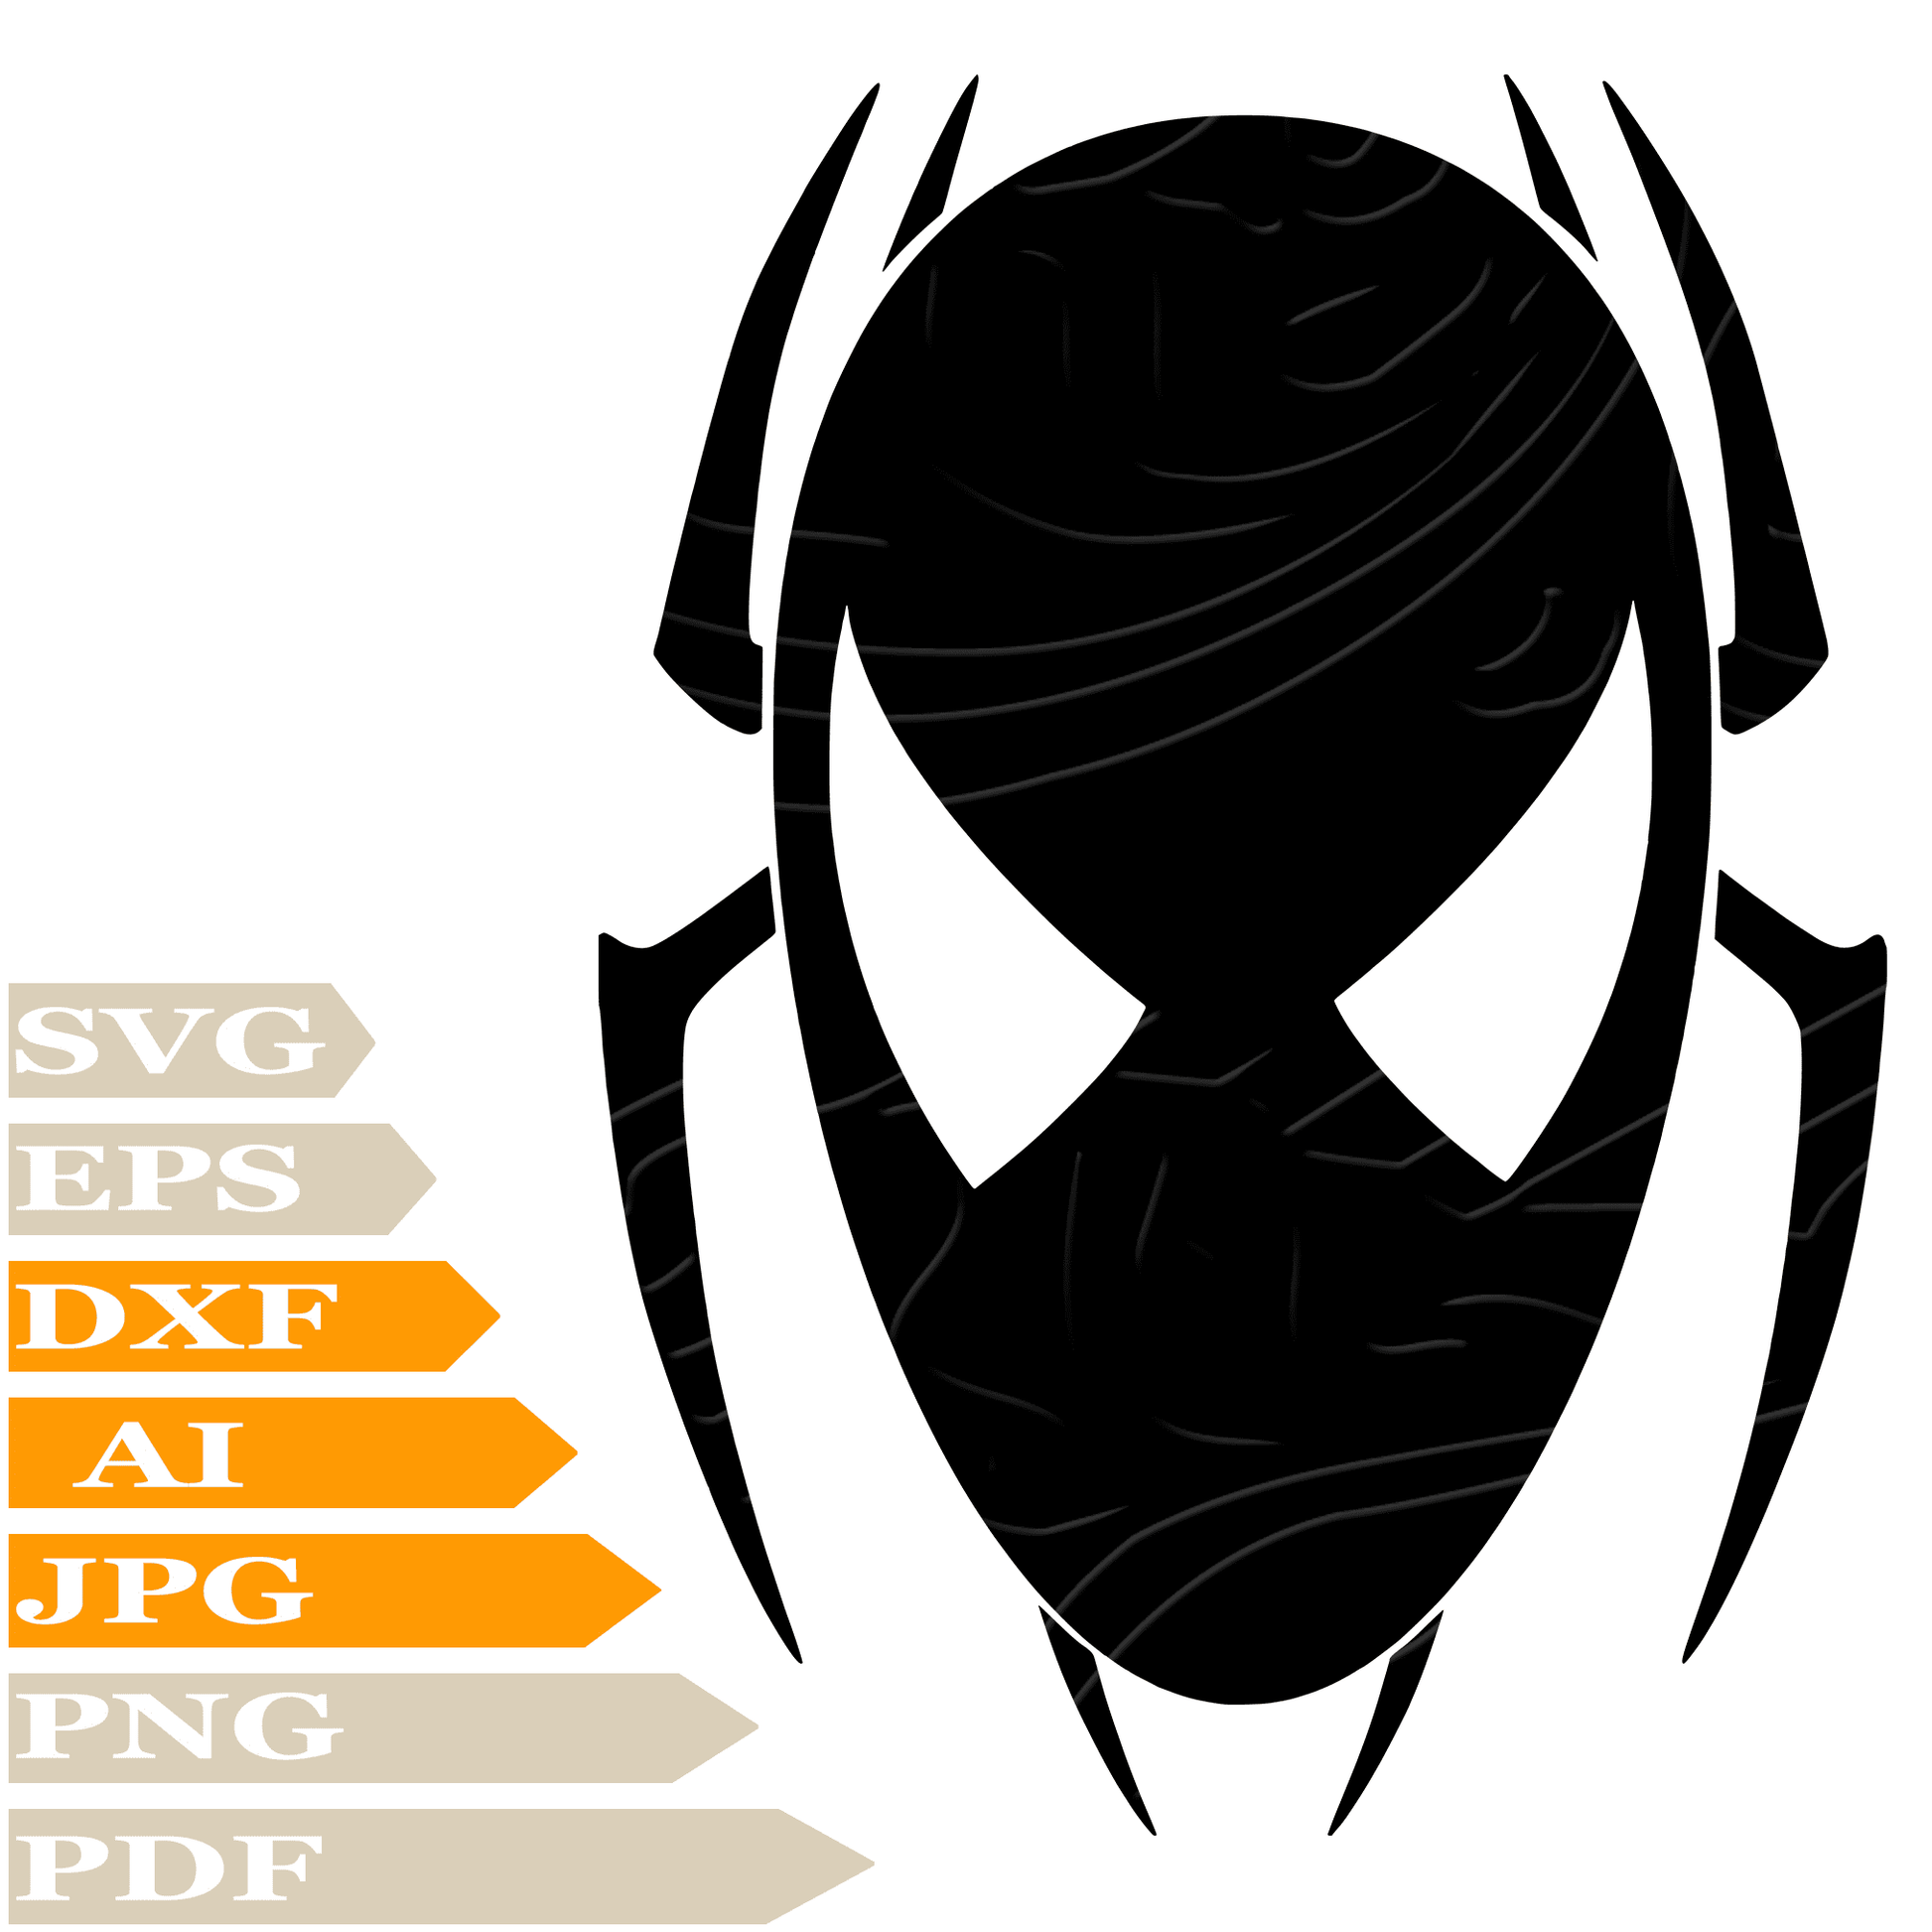 Spider ﻿SVG, Spiderman Personalized SVG, Spiderman Logo Drawing SVG, Spiderman Vector Graphics, Spiderman Logo For Cricut, Digital Instant Download, Clip Art, Cut File, For Shirts, Silhouette, Illustration